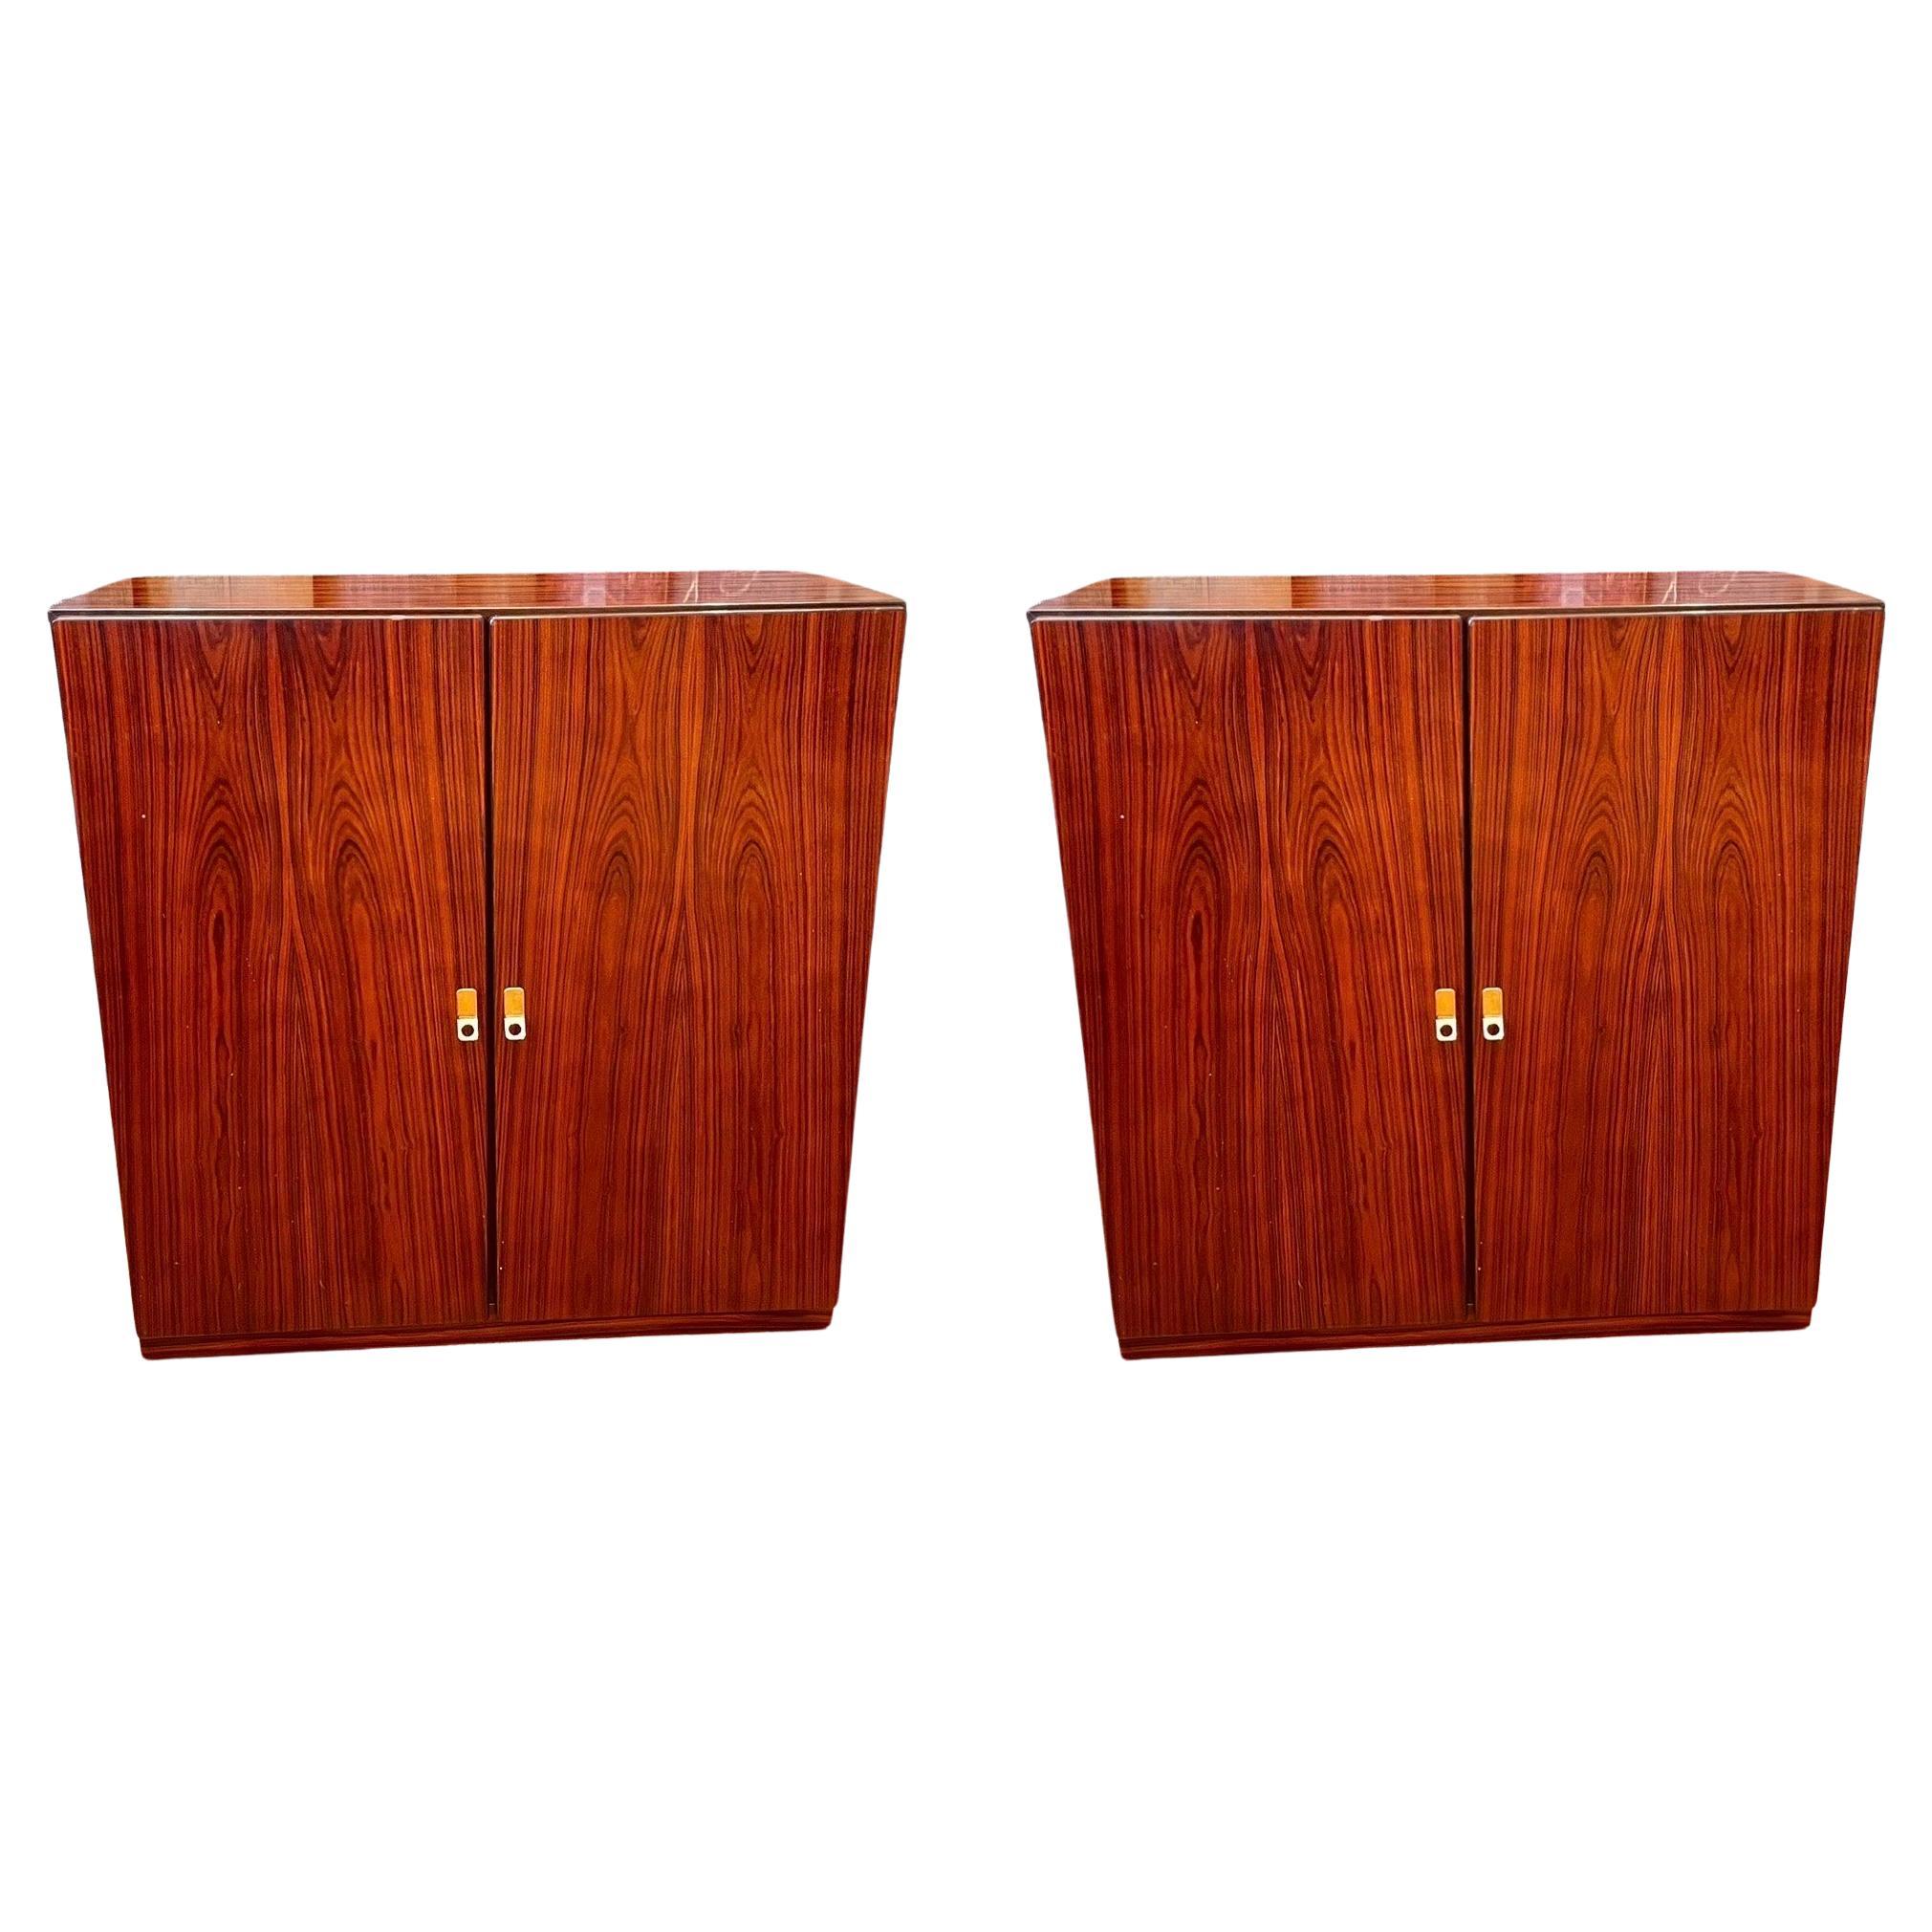 Pair of Danish Modern Rosewood Cabinets by Brouer Furniture For Sale